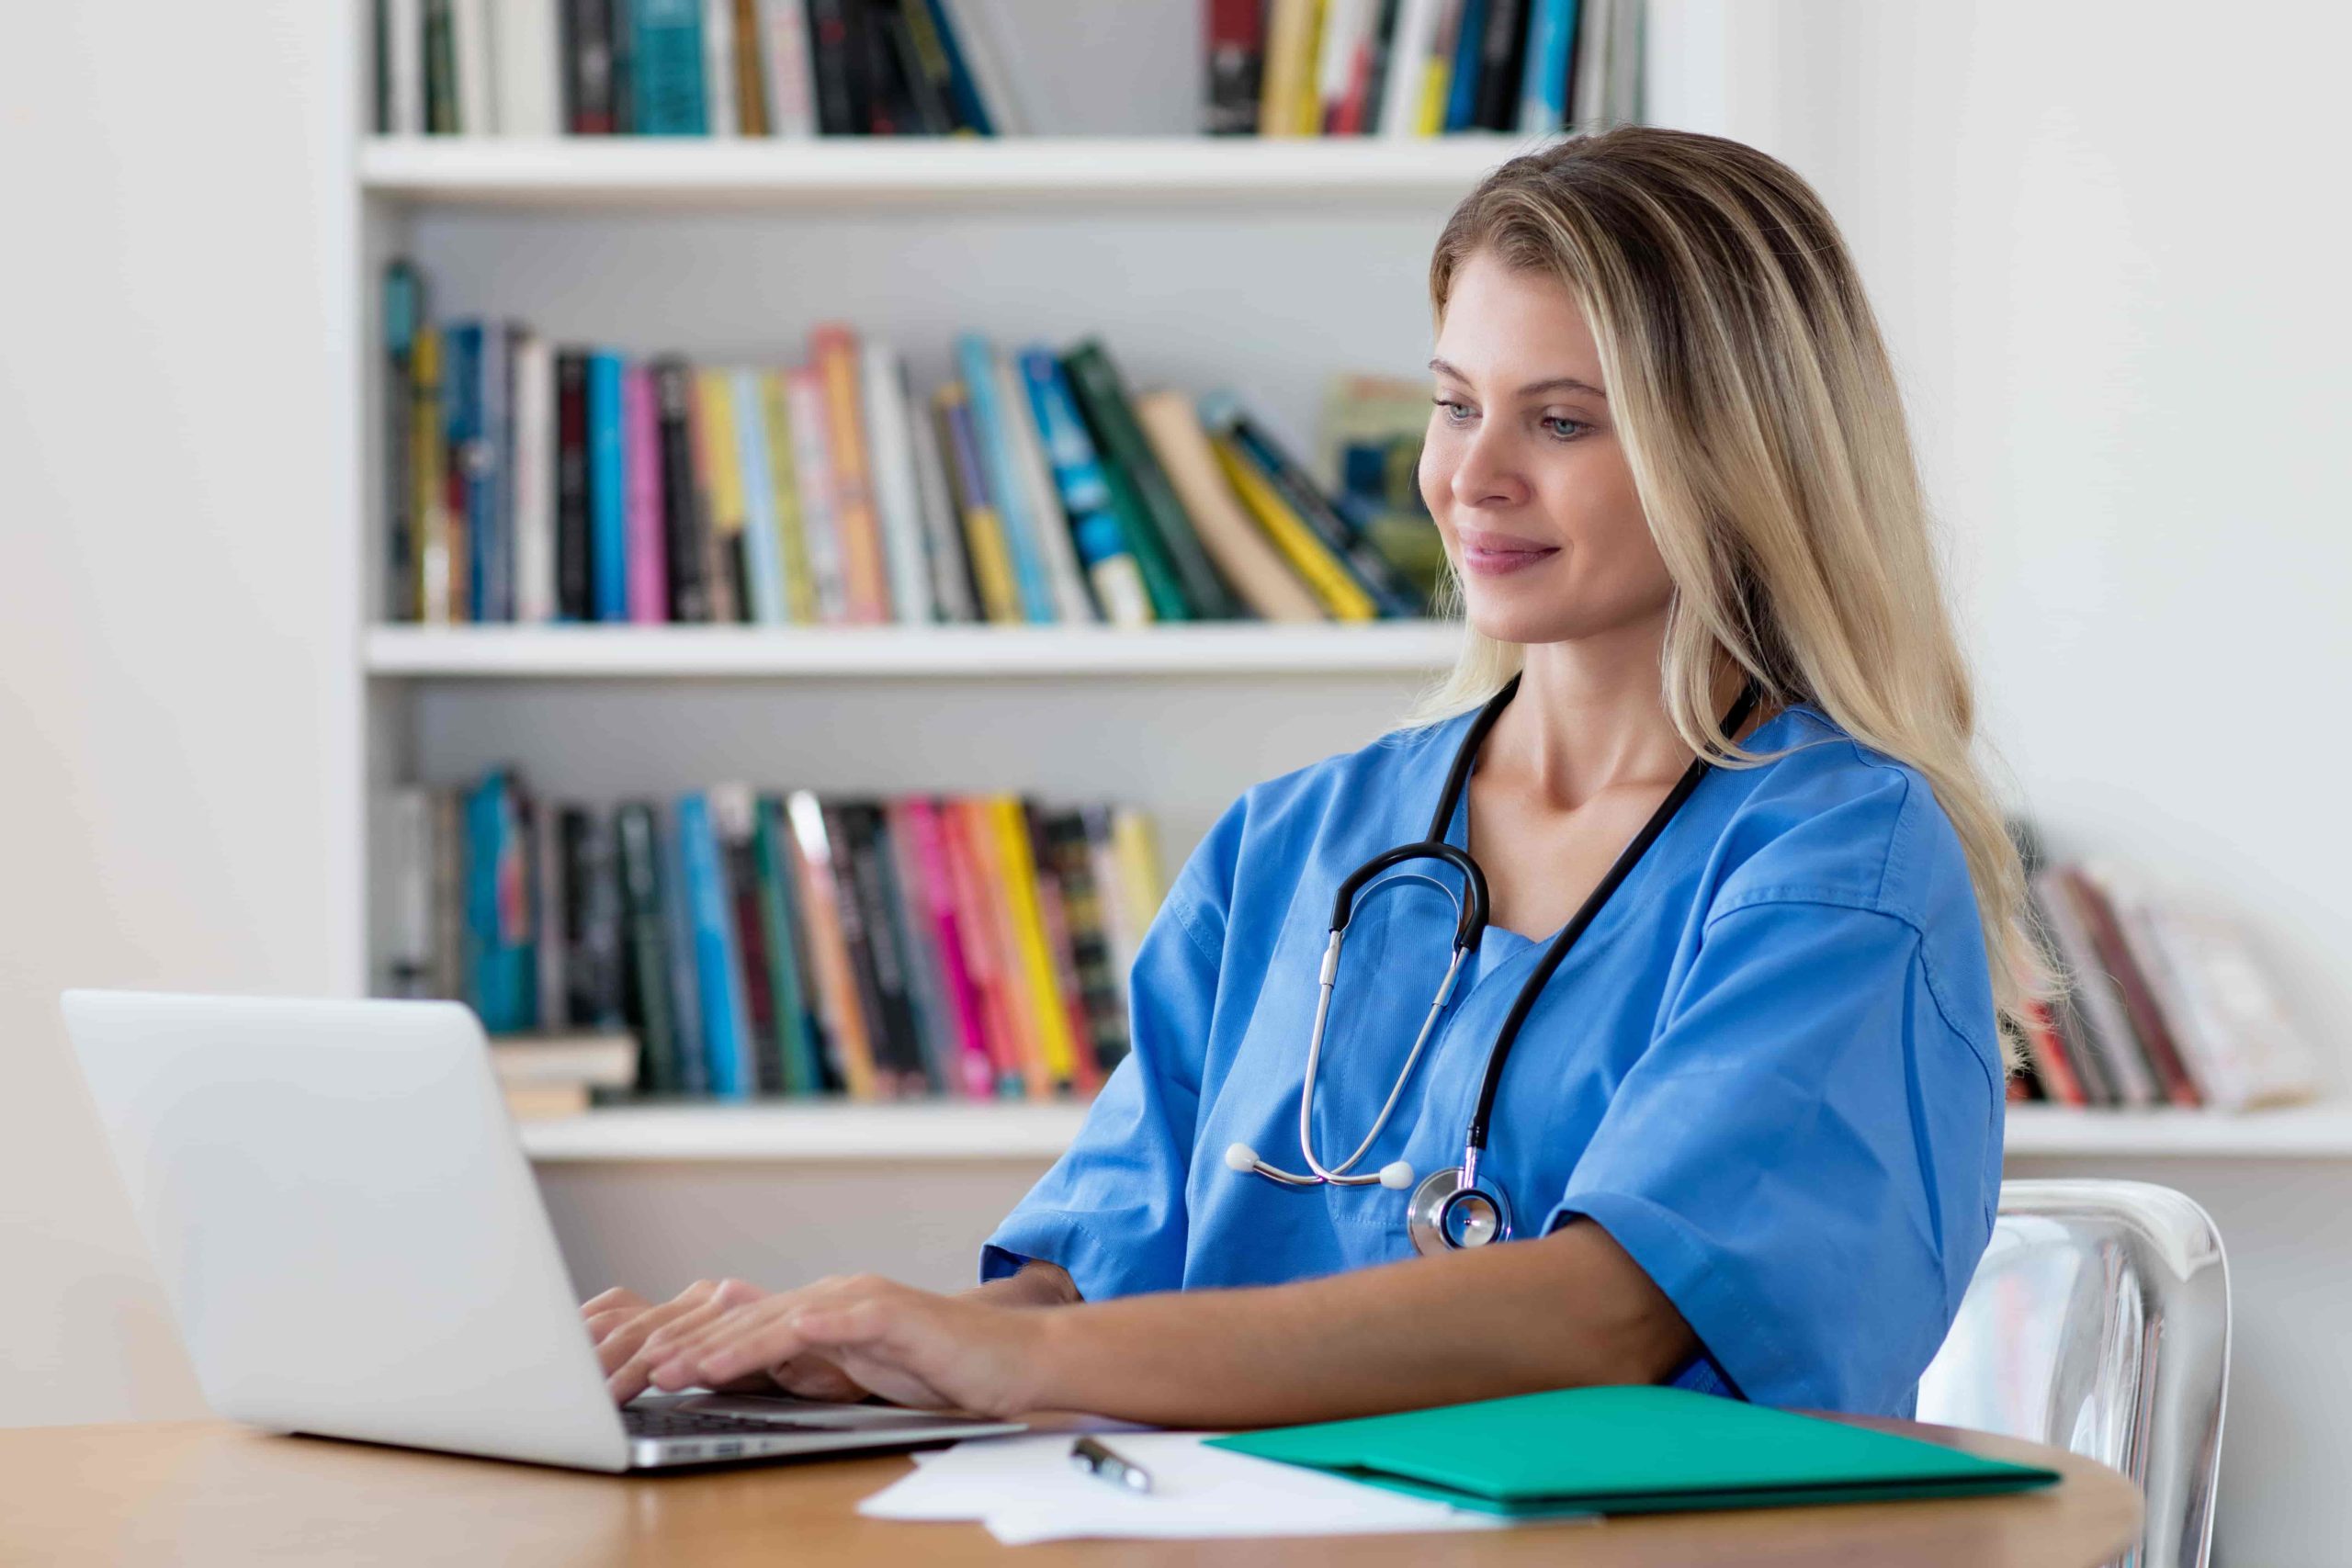 A blonde medical professional using a laptop